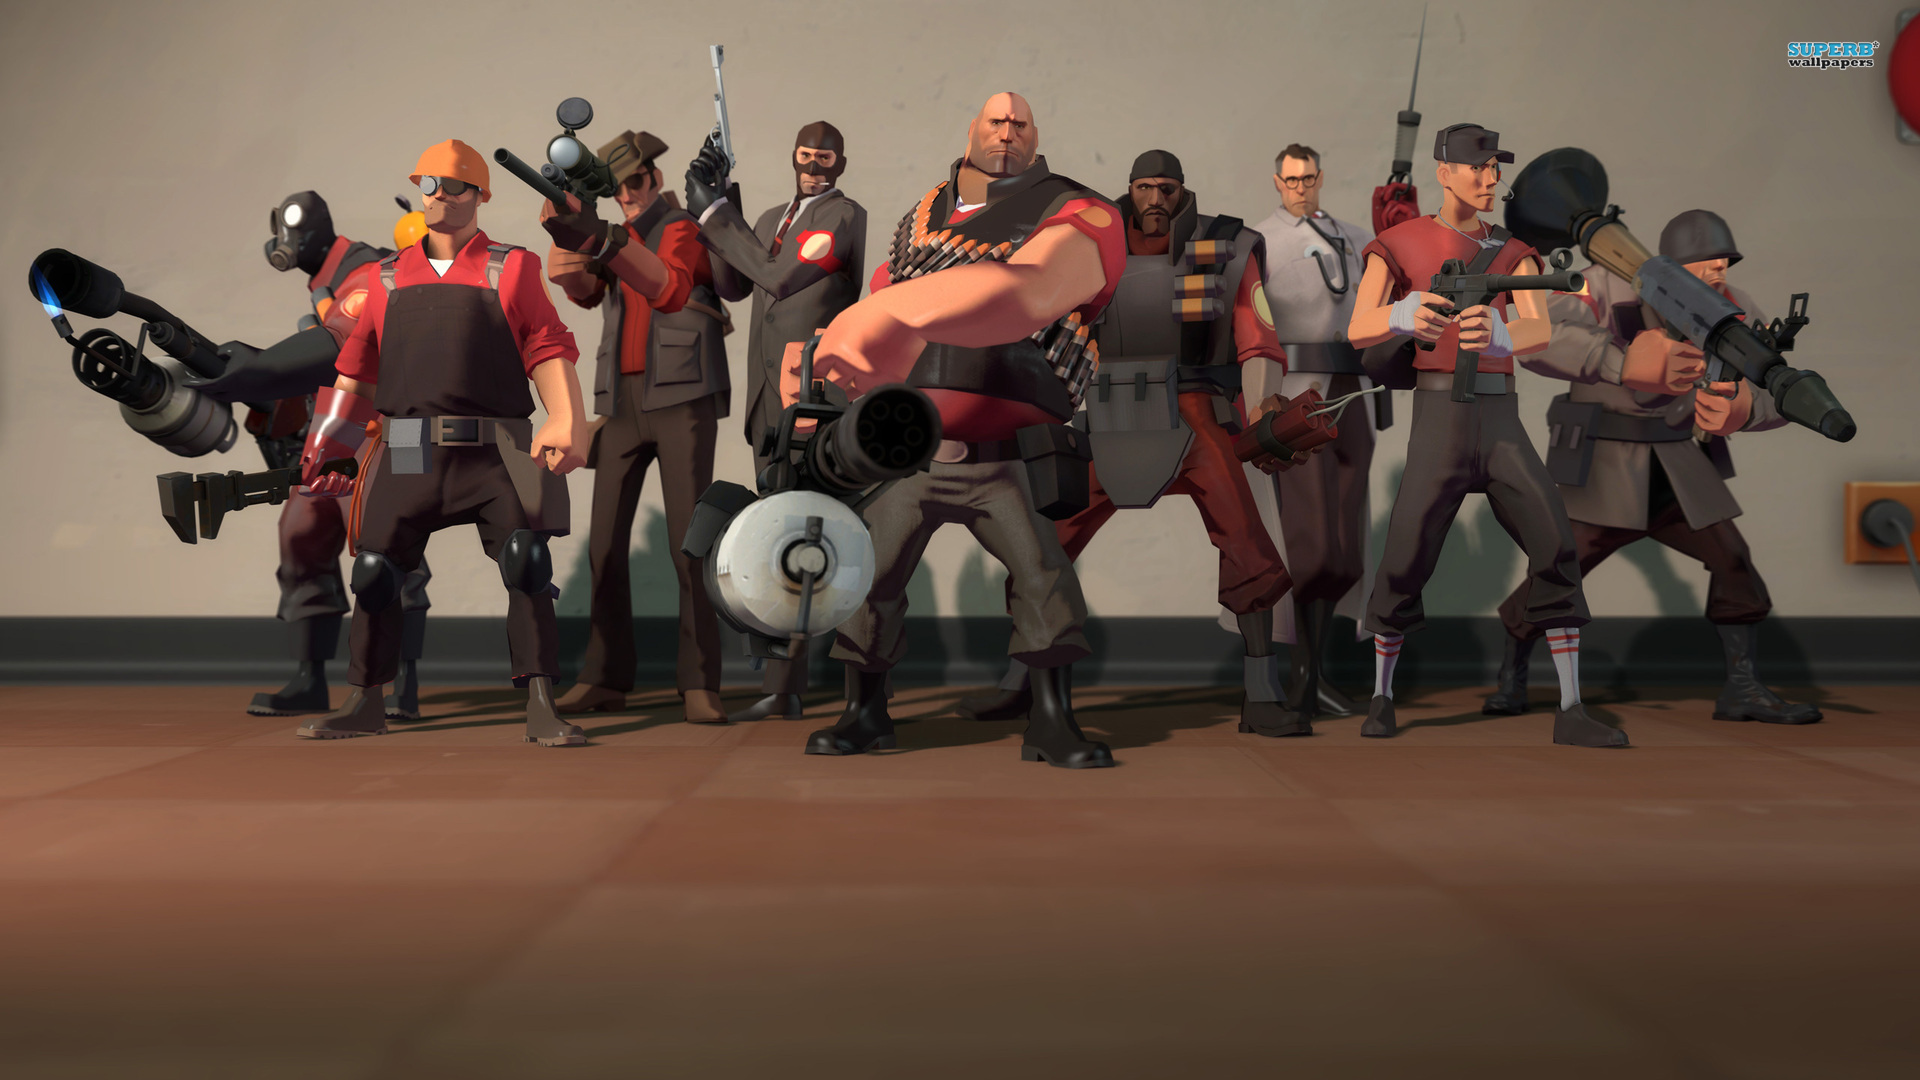 Nice Images Collection: Team Fortress 2 Desktop Wallpapers